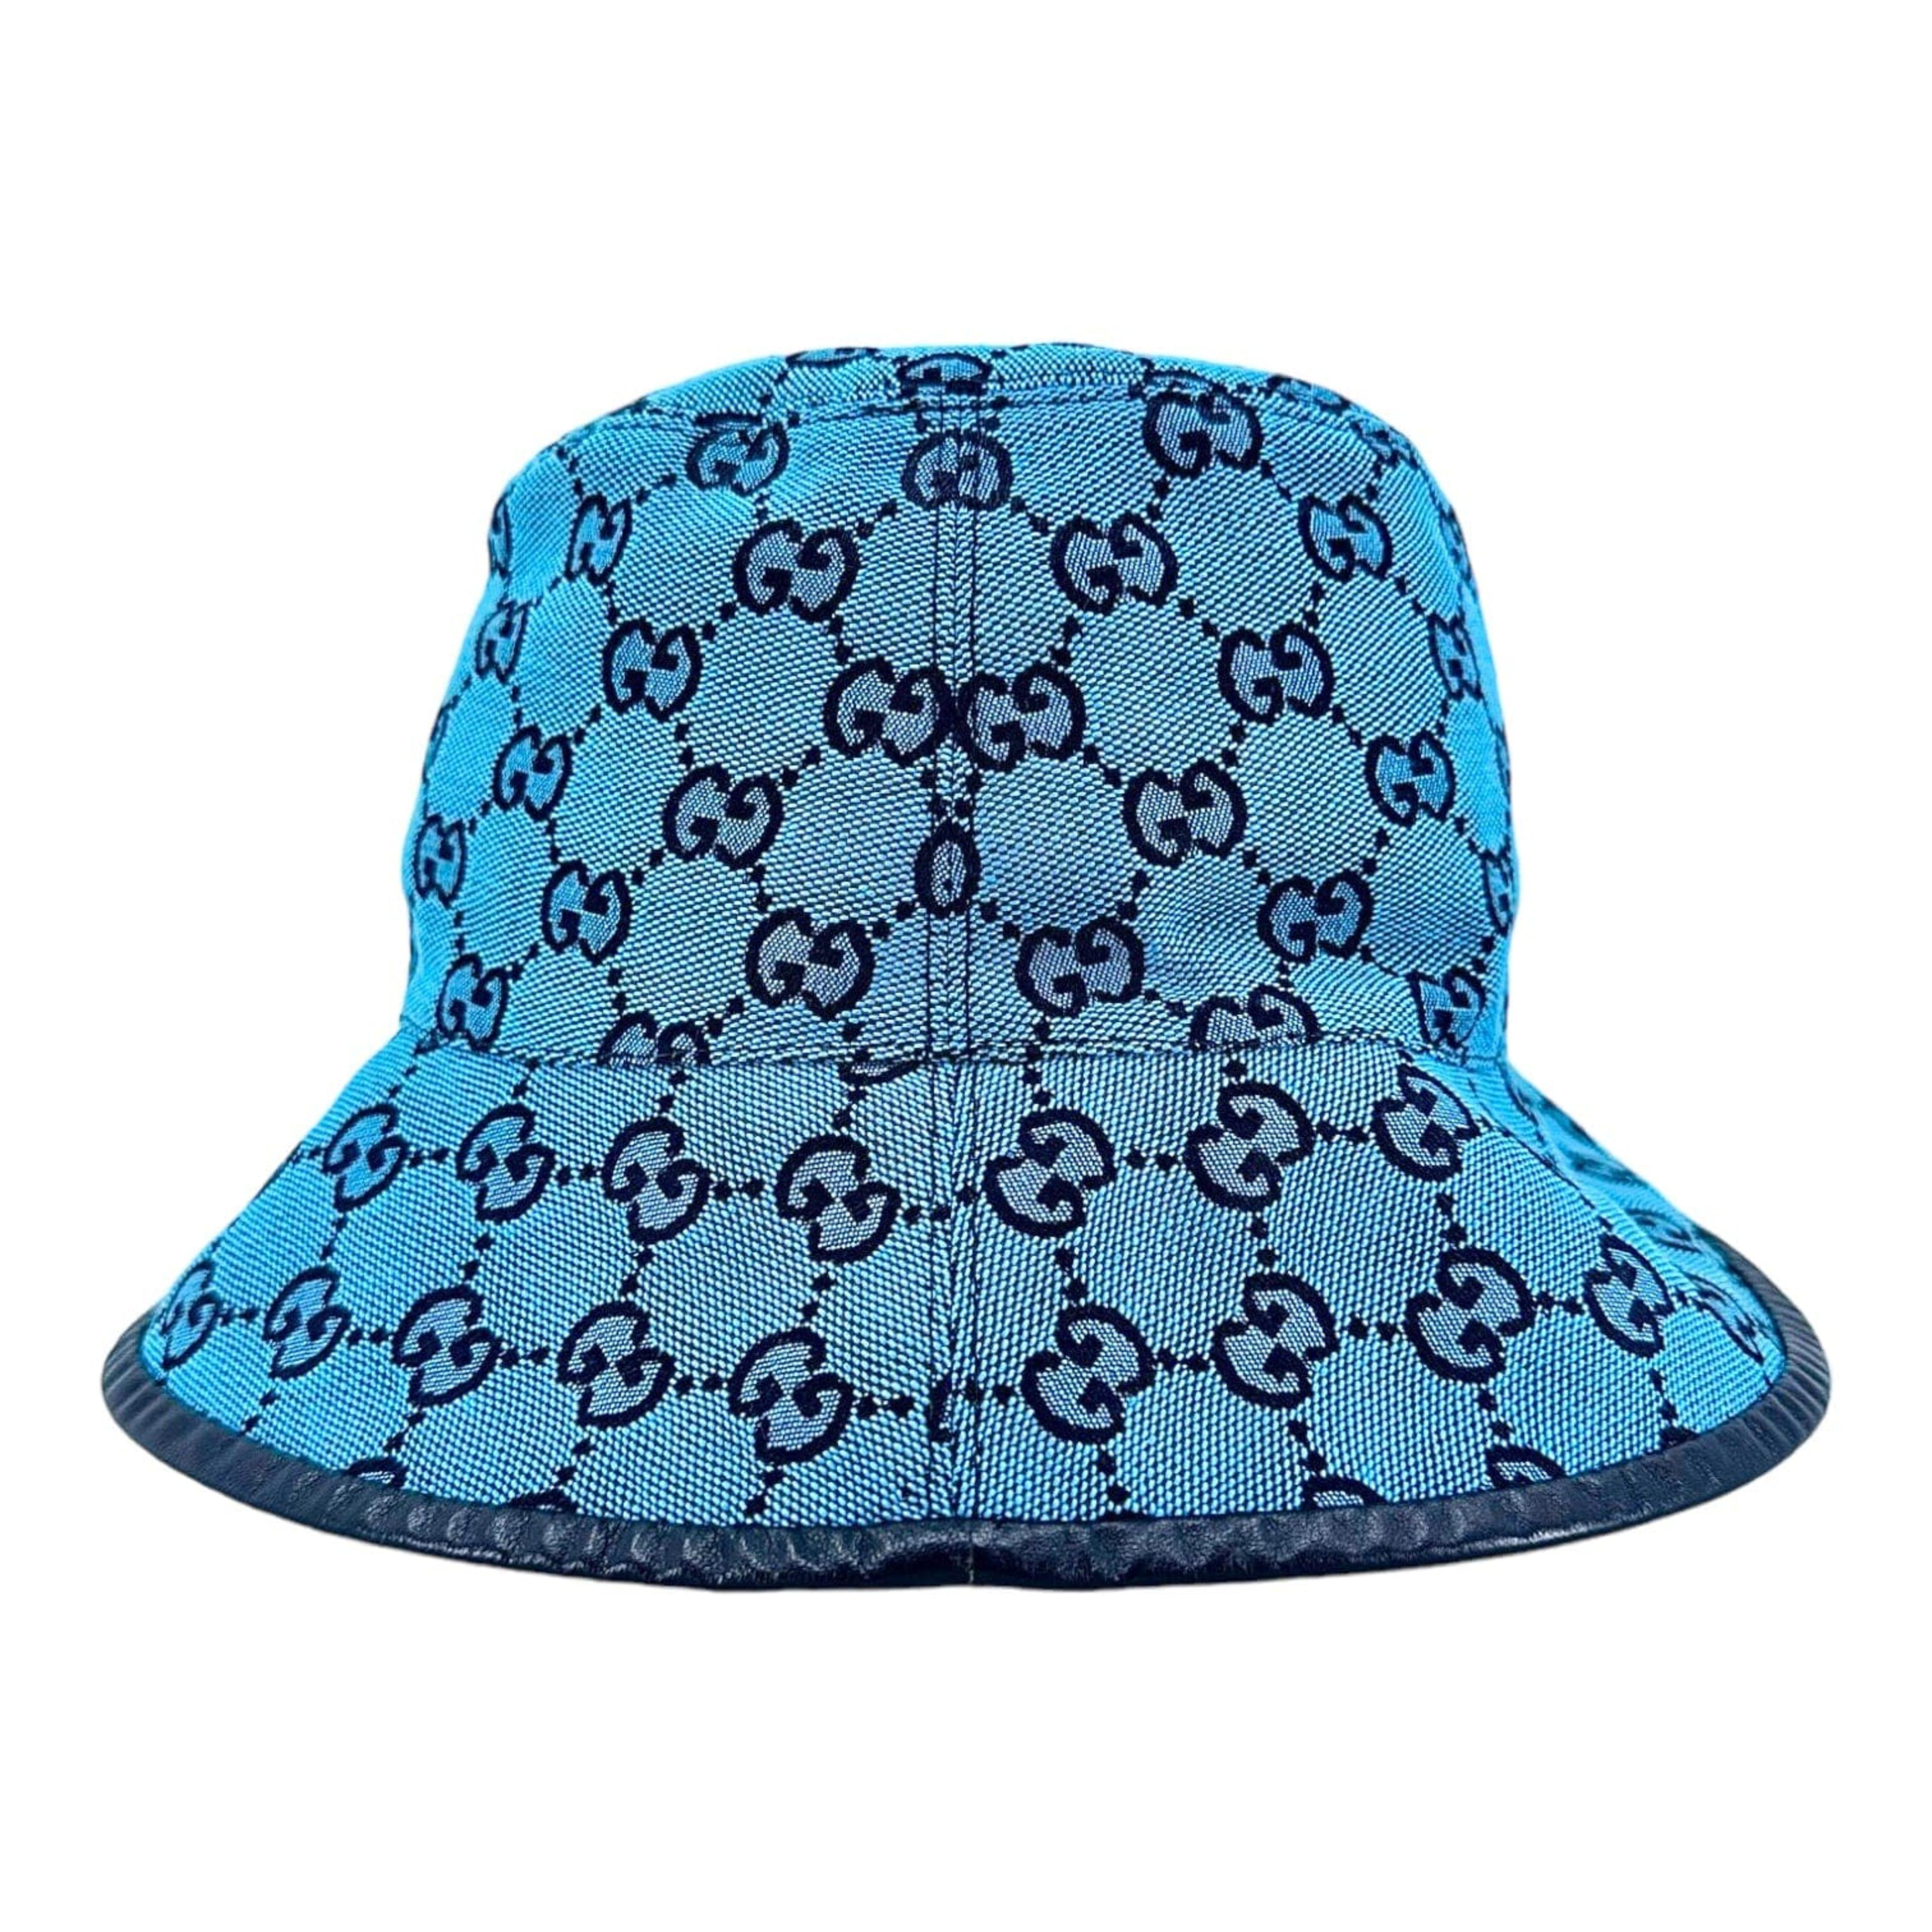 Alternate View 1 of Gucci GG Multicolor Canvas Bucket Hat Blue Black Pre-Owned